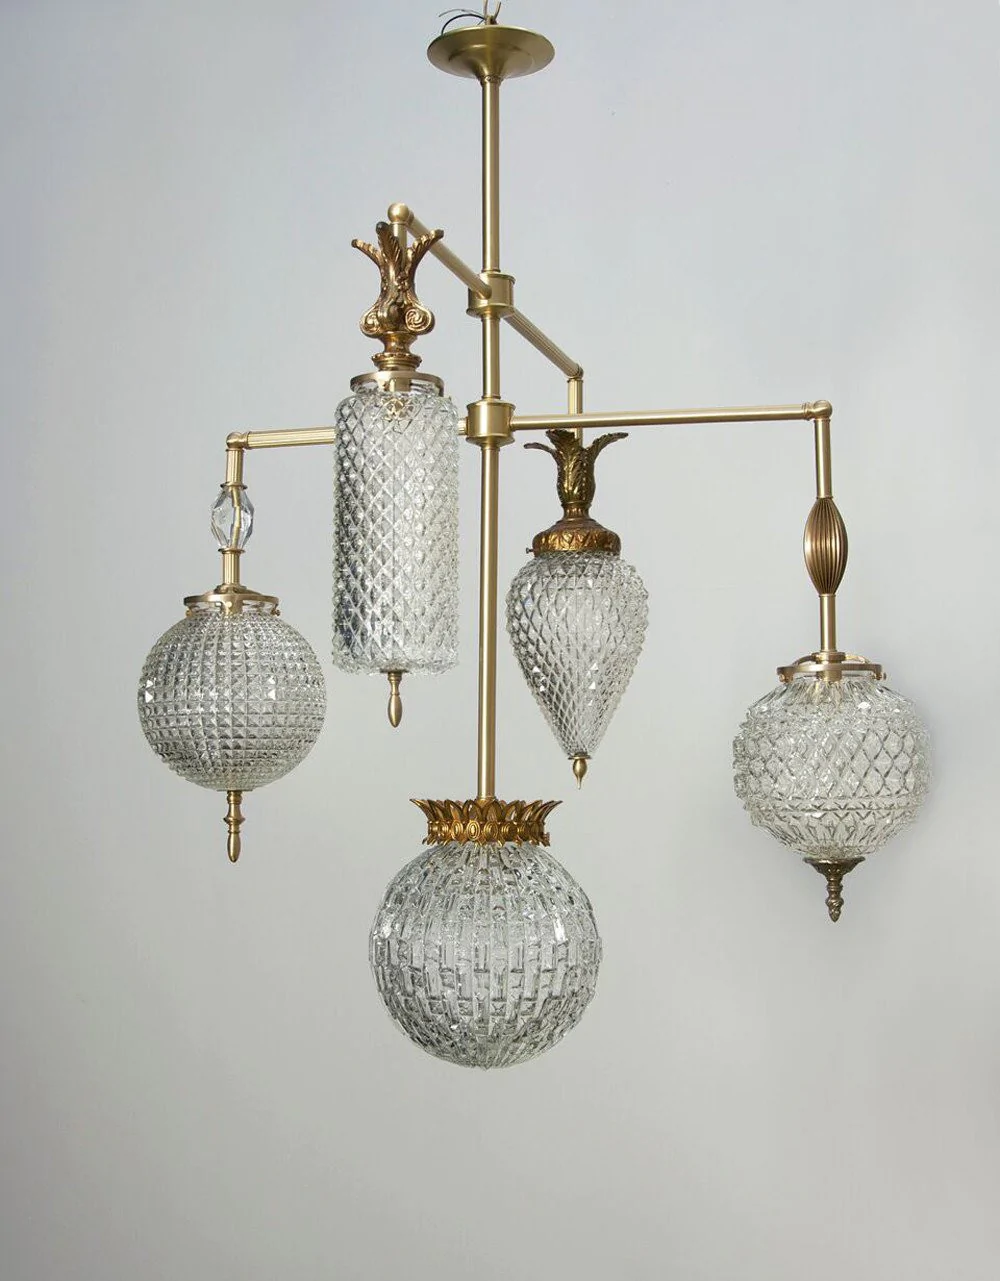 Illuminate Your Space with Vintage
Lighting